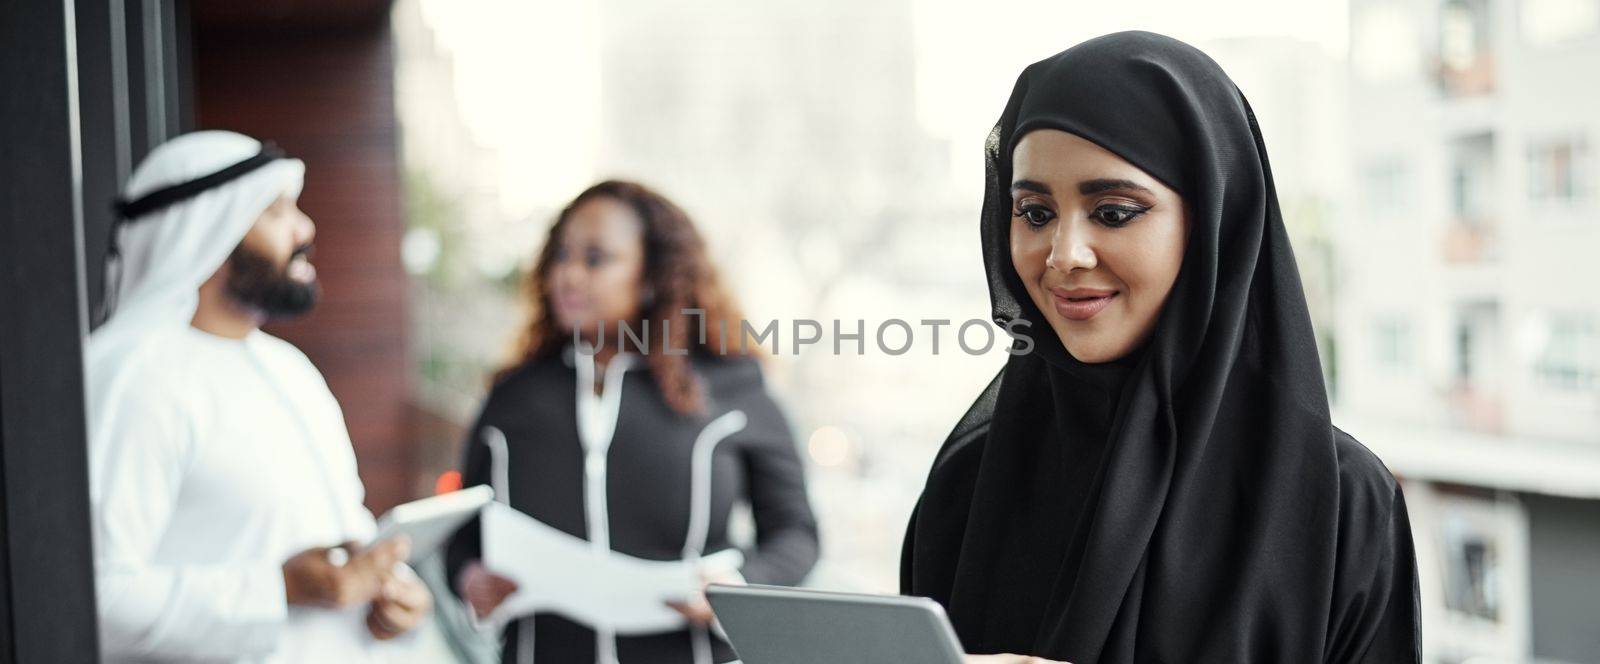 Shes got everything she needs on her tablet. an attractive young businesswoman dressed in Islamic traditional clothing using a tablet on her office balcony